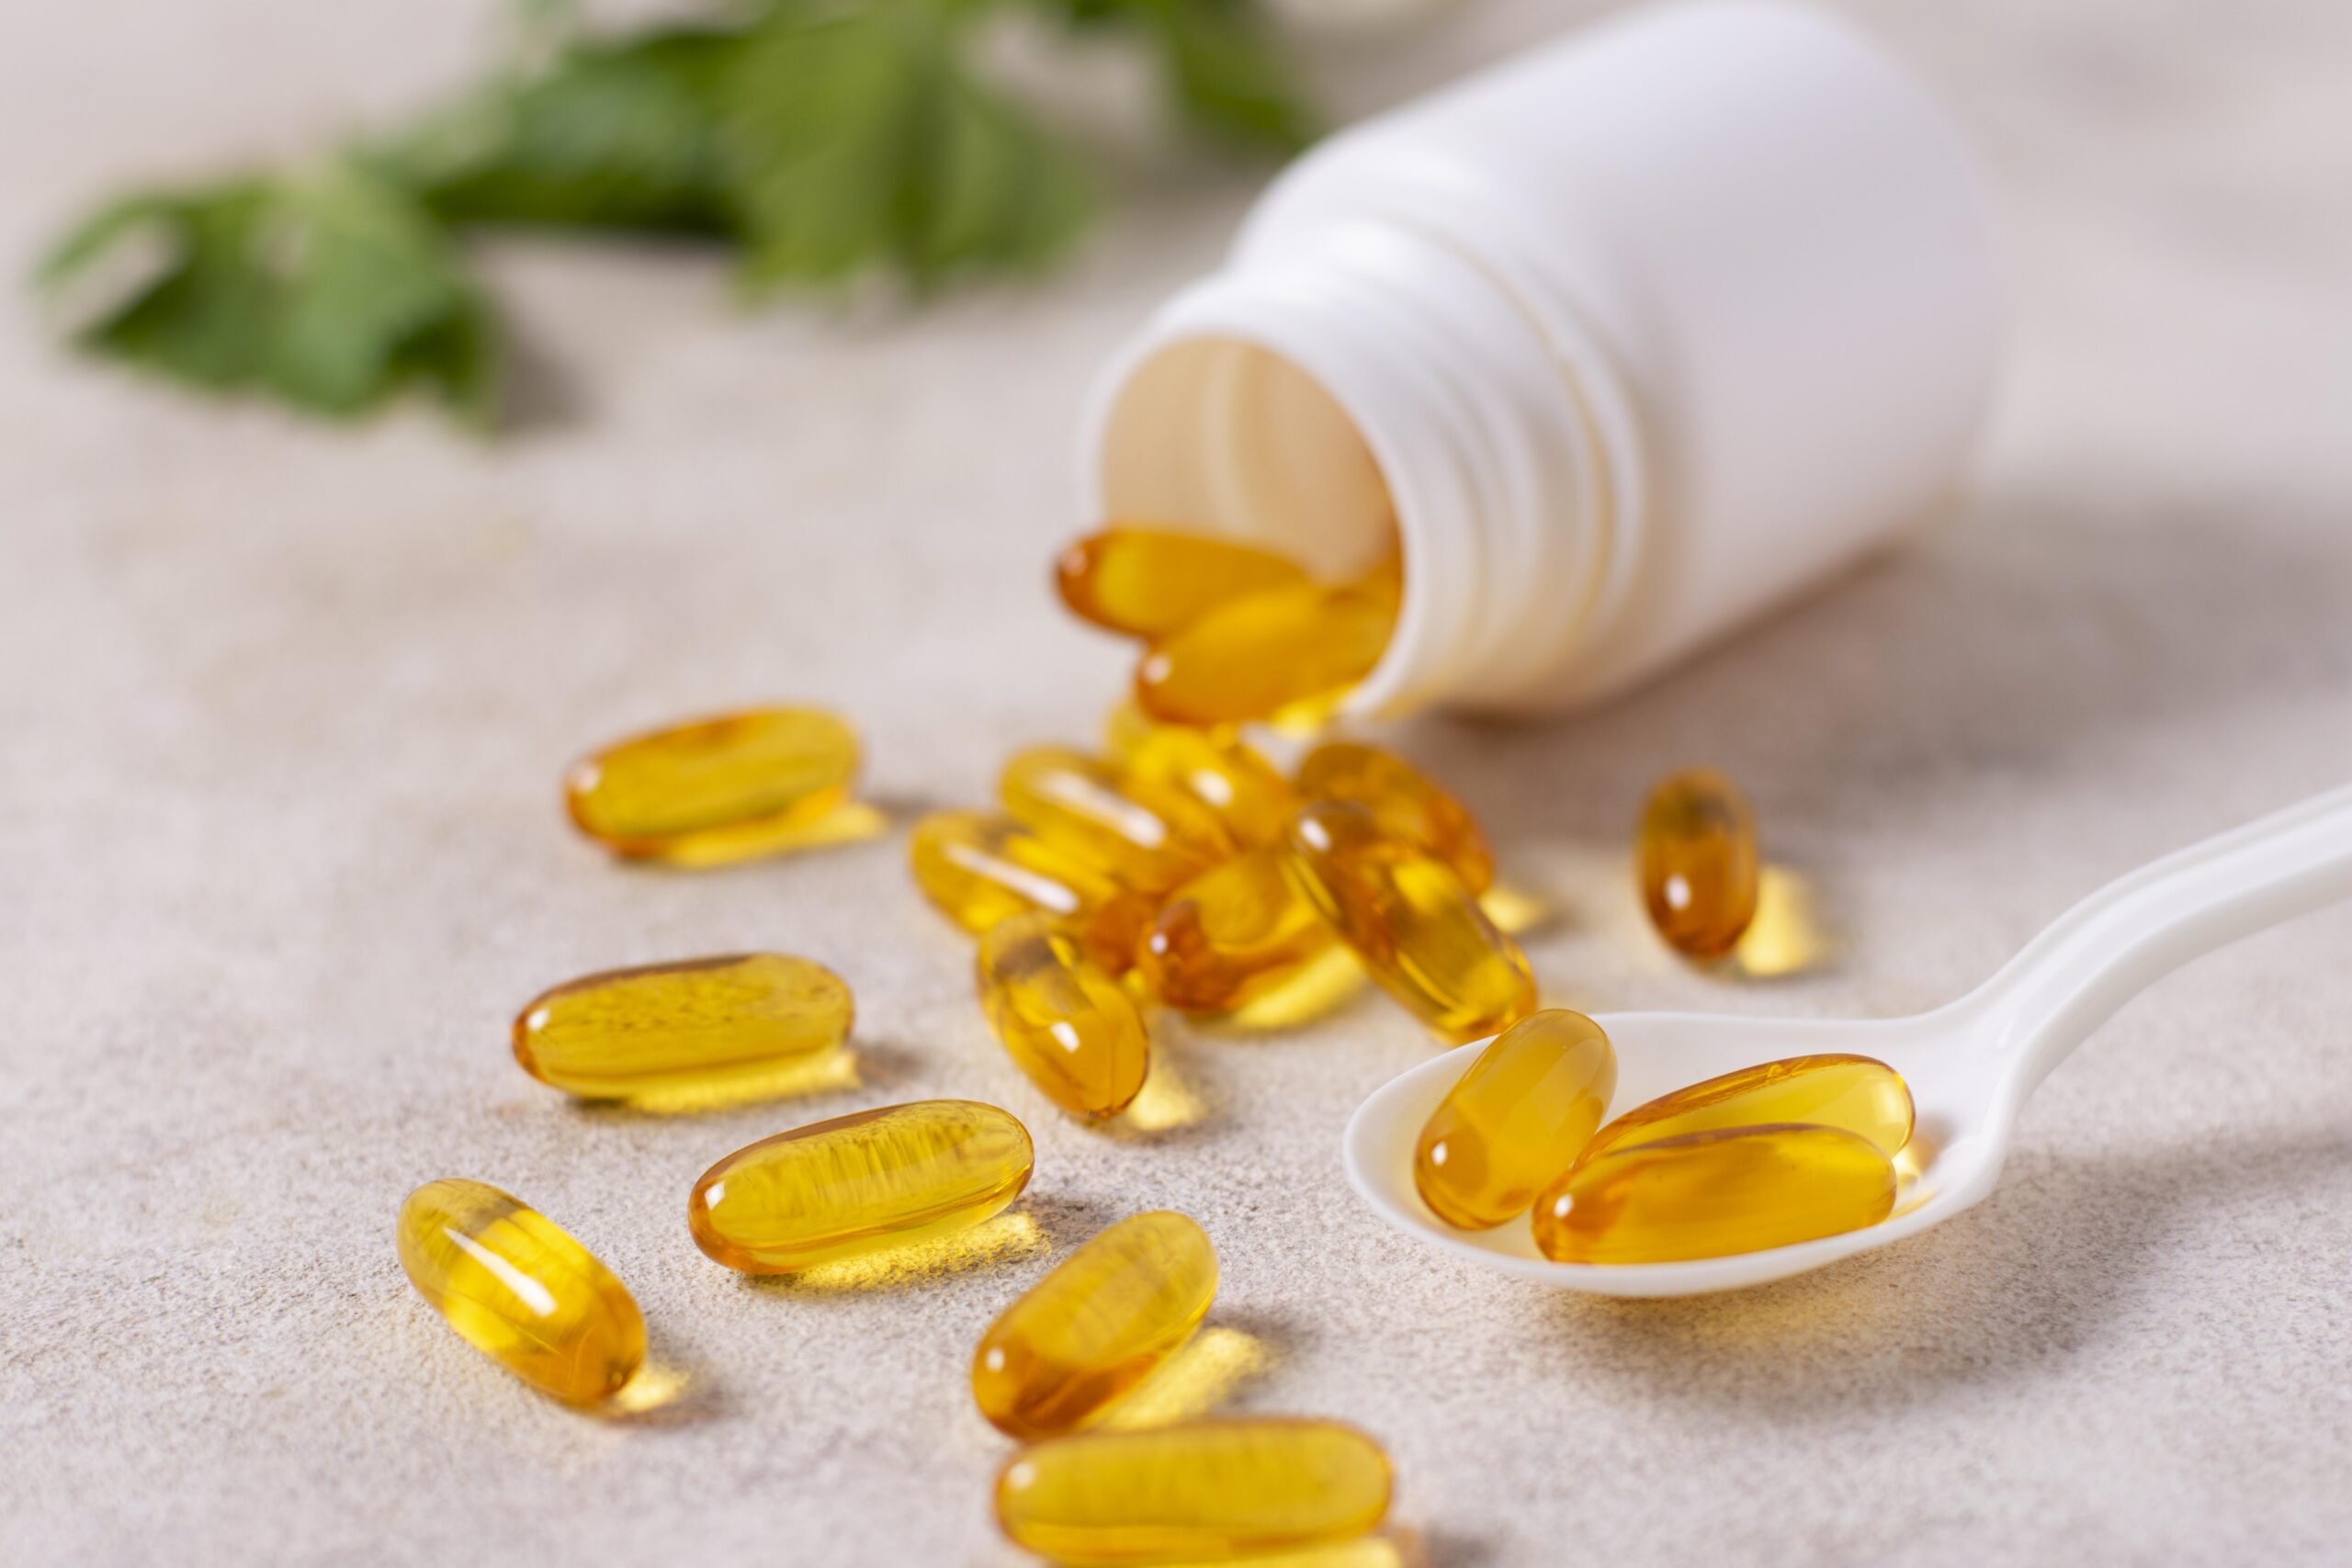 "The Role of Vitamin D in Boosting the Immune System"